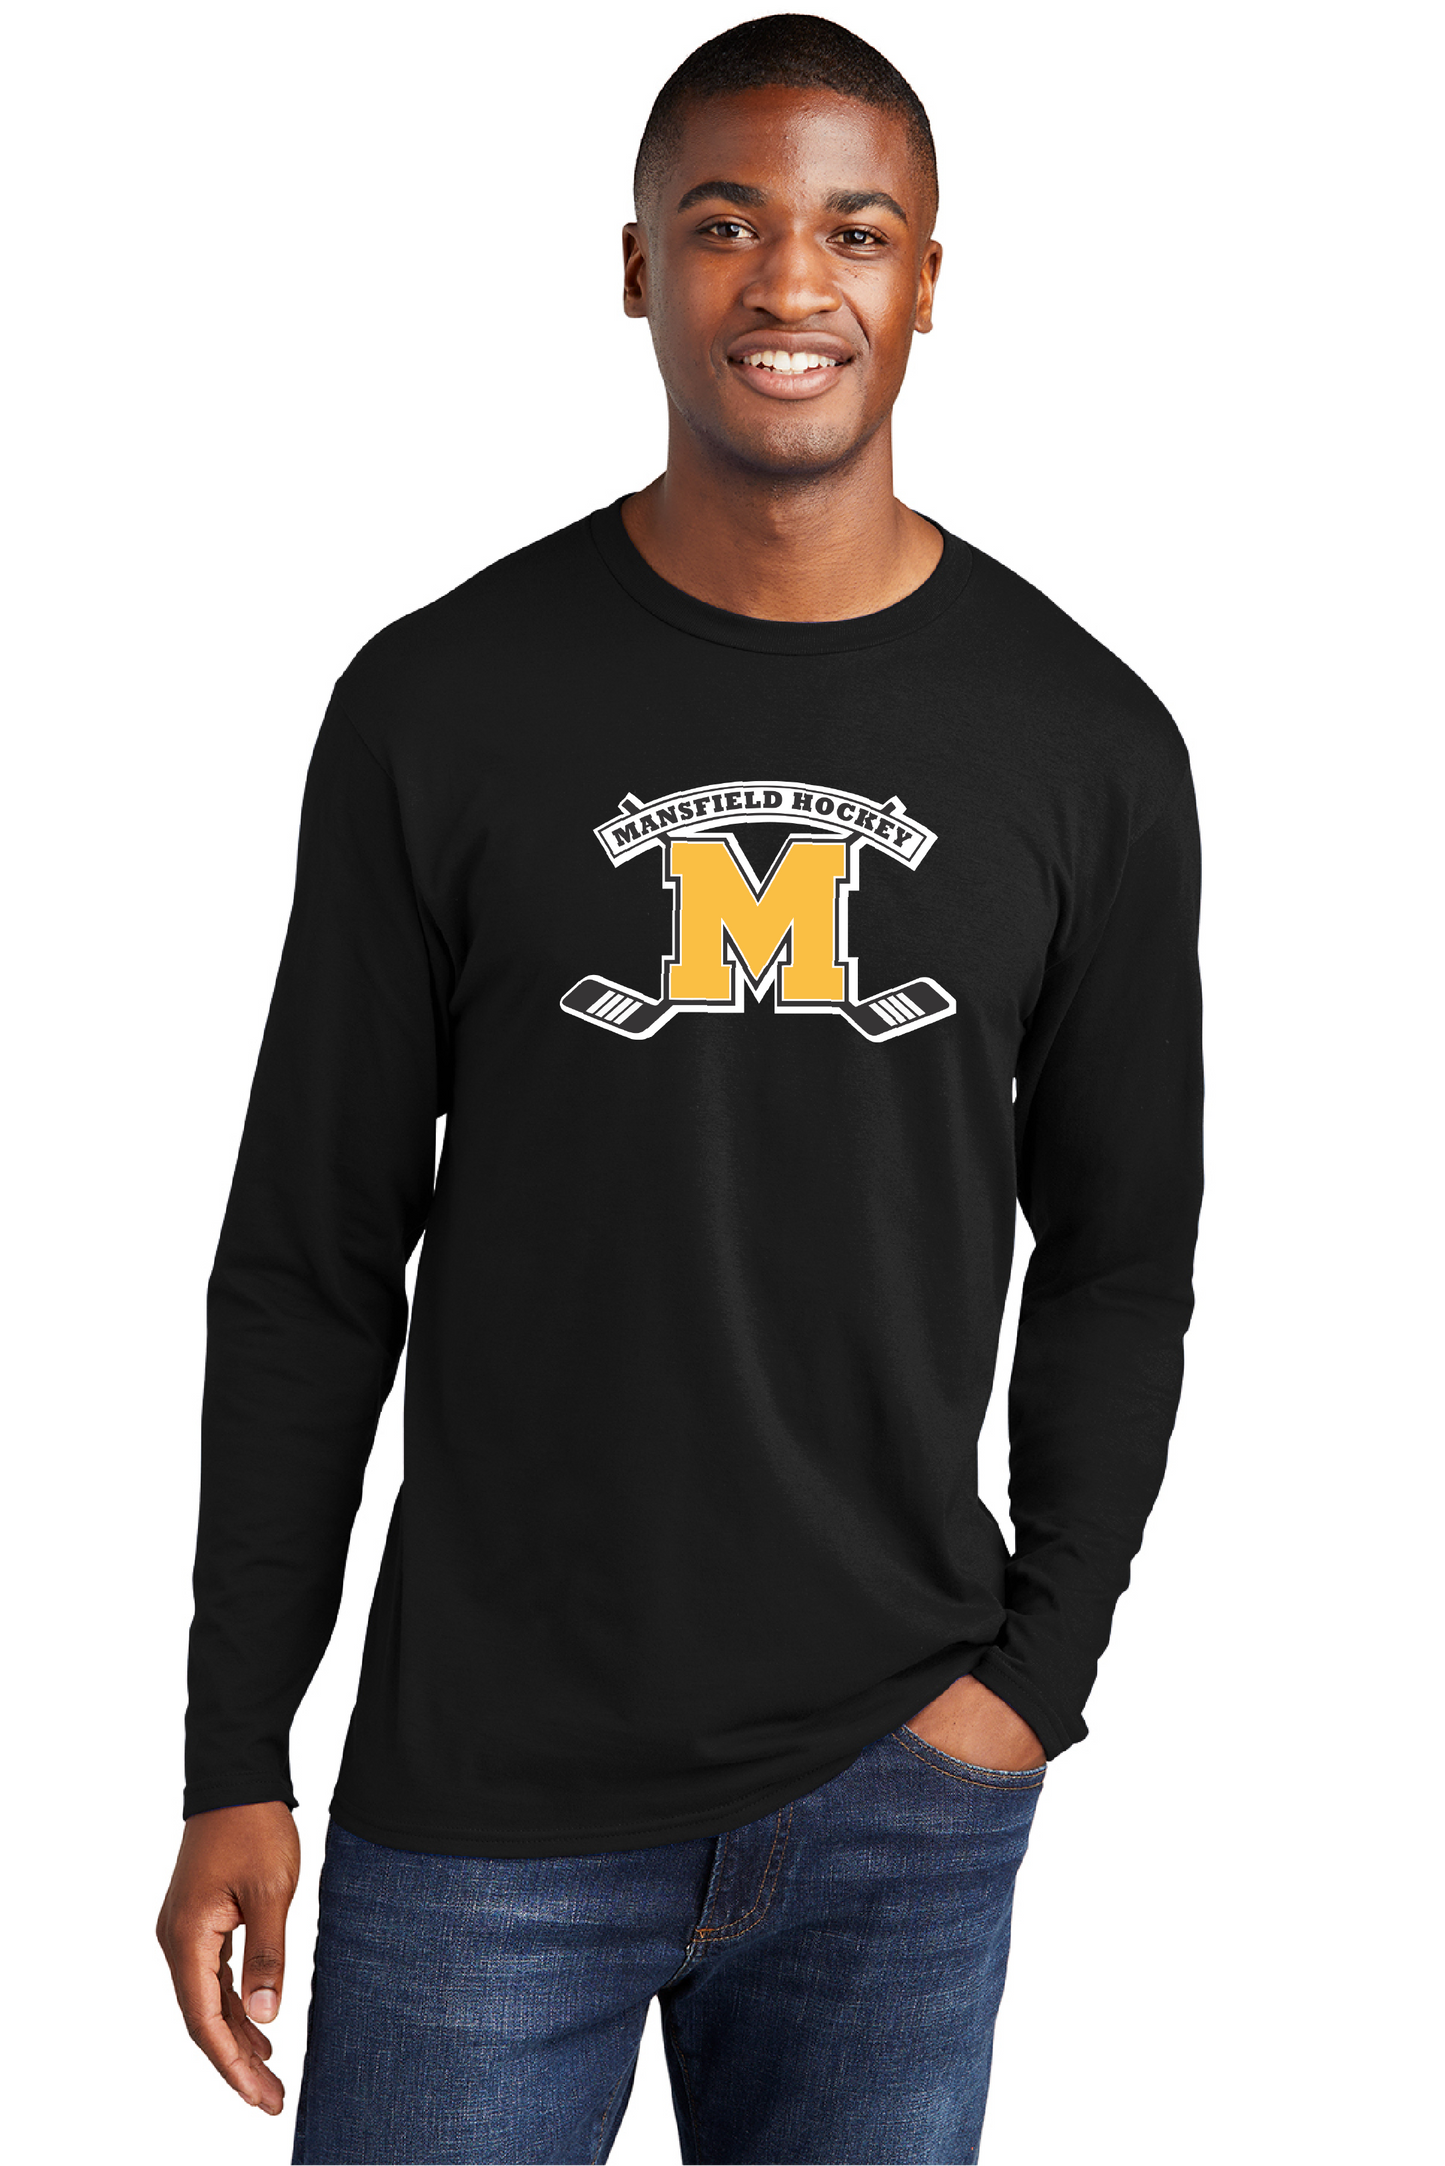 Mansfield Hockey Long Sleeve Shirt Front ONLY